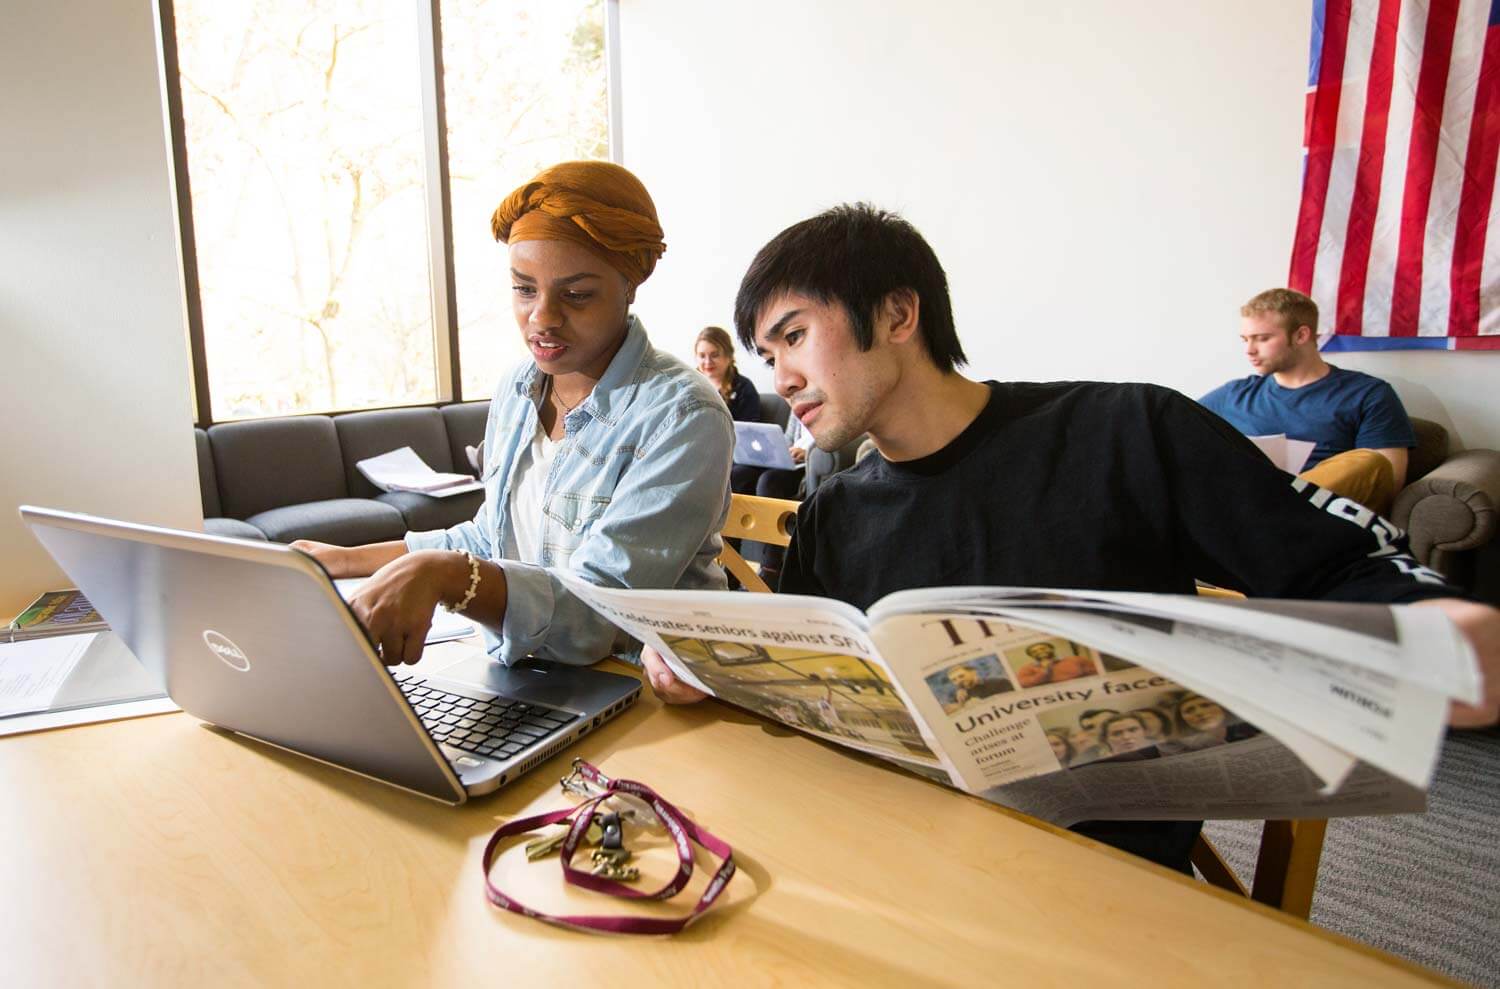 Students looking at laptop and newspaper